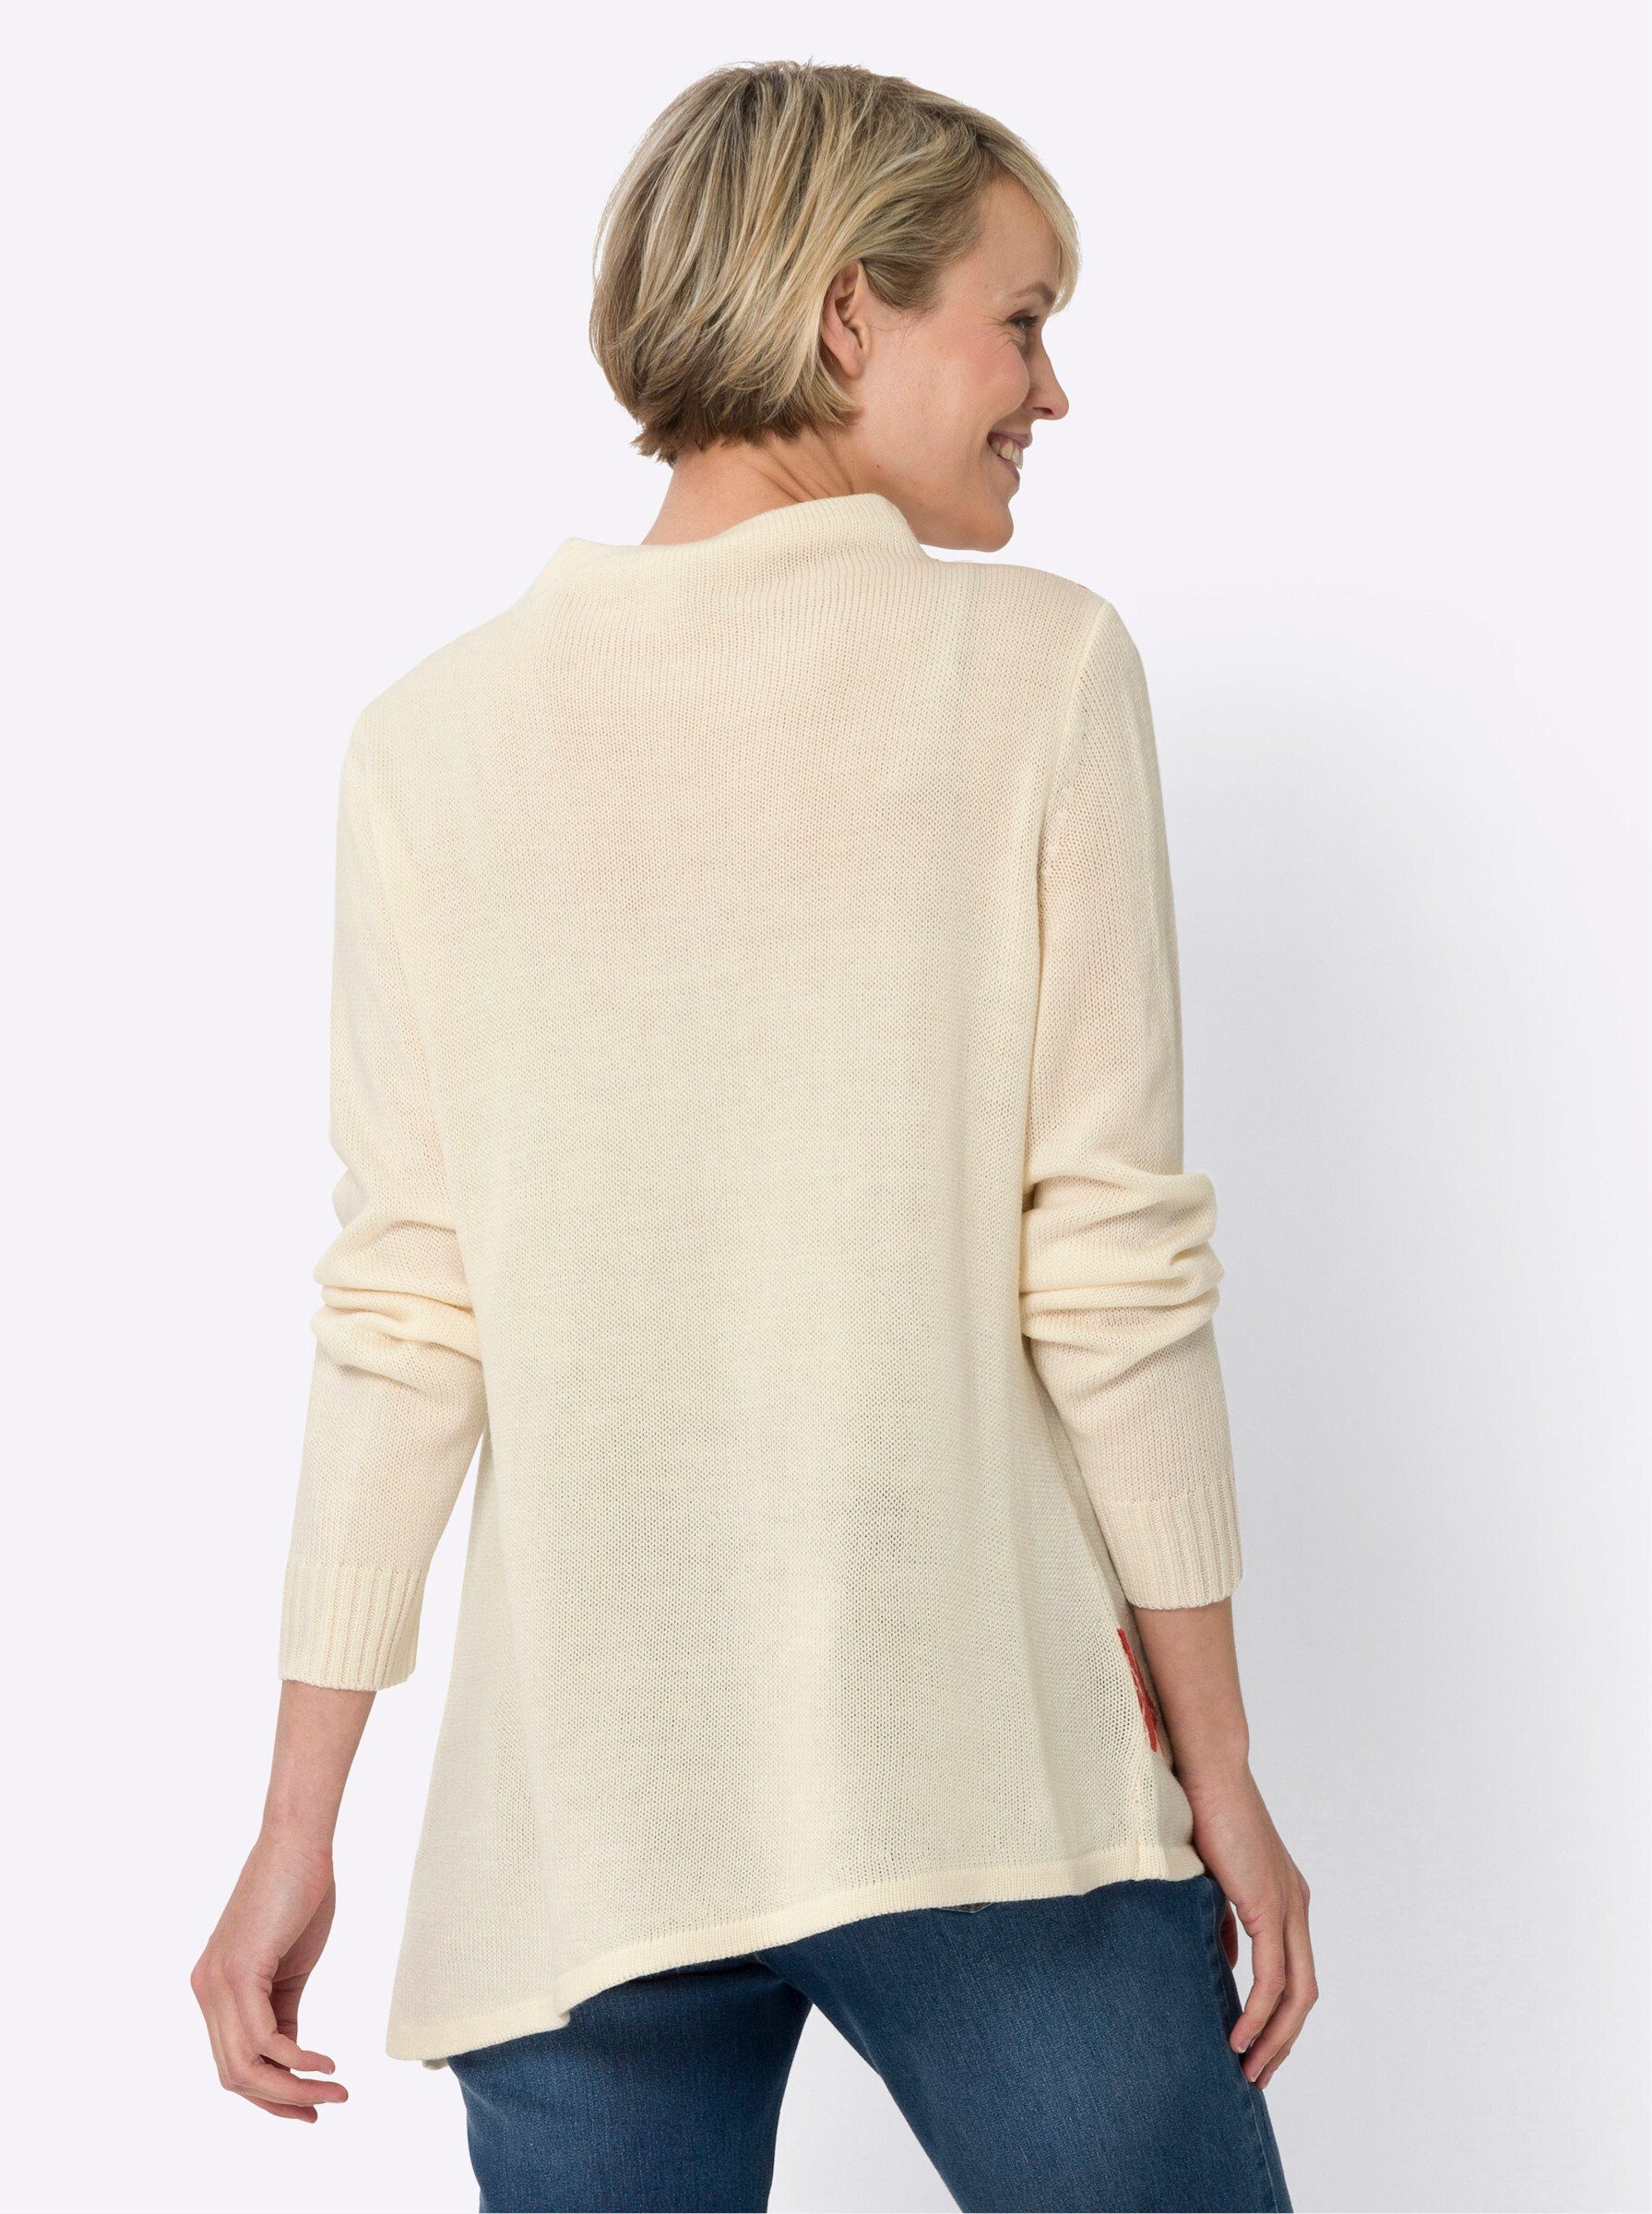 champagner-oliv Strickpullover Sieh an!